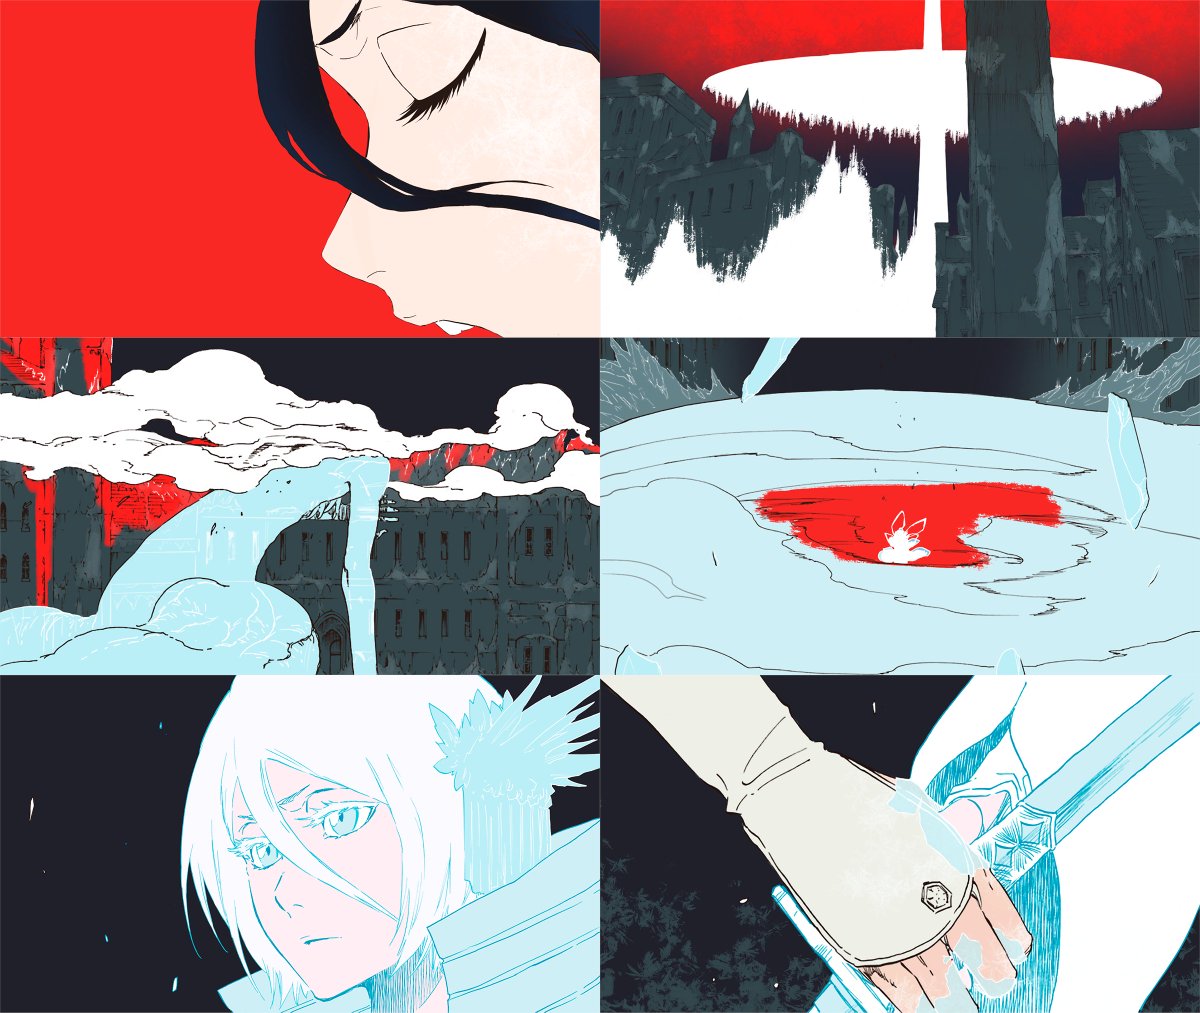 #TYBW V 1.0
Rukia bankai wip - keeping the red for now, flat colors